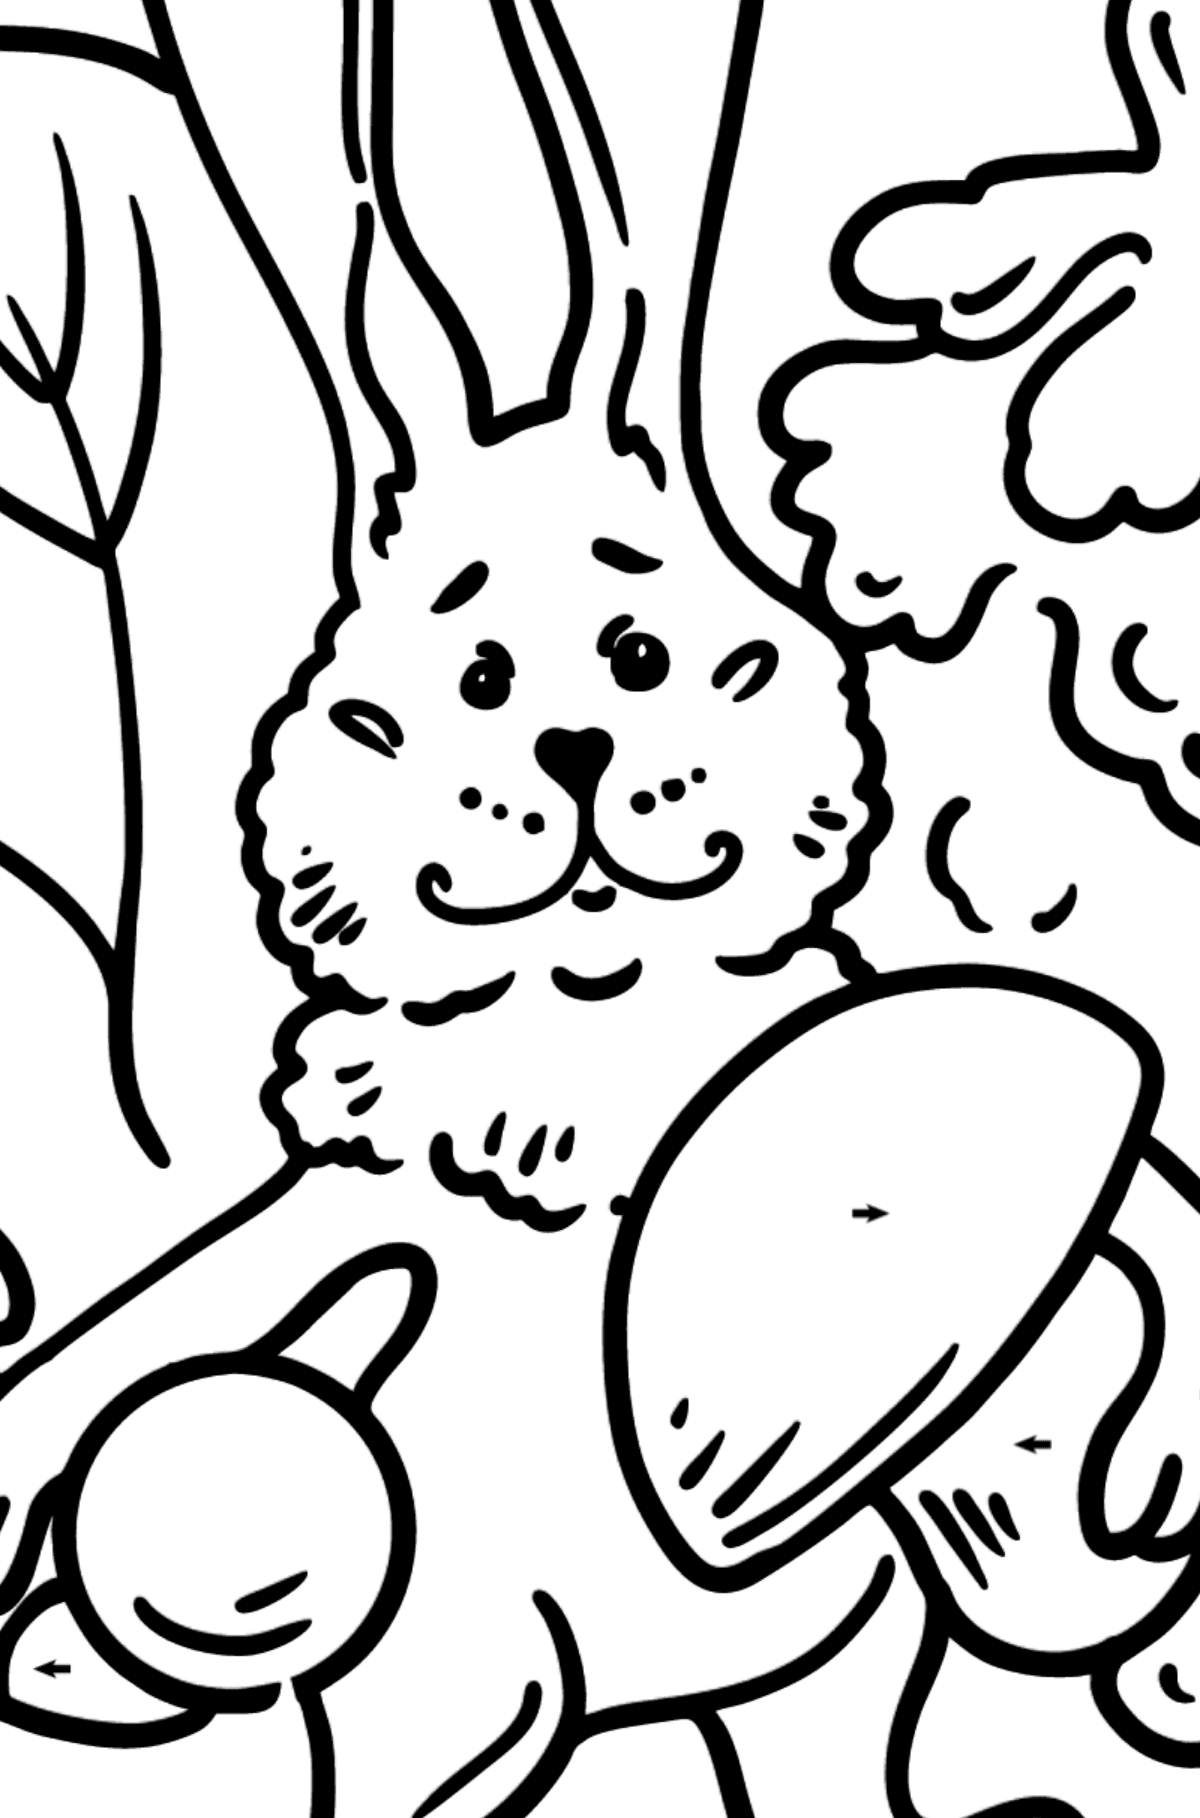 Bunny in the Forest coloring page - Coloring by Symbols for Kids